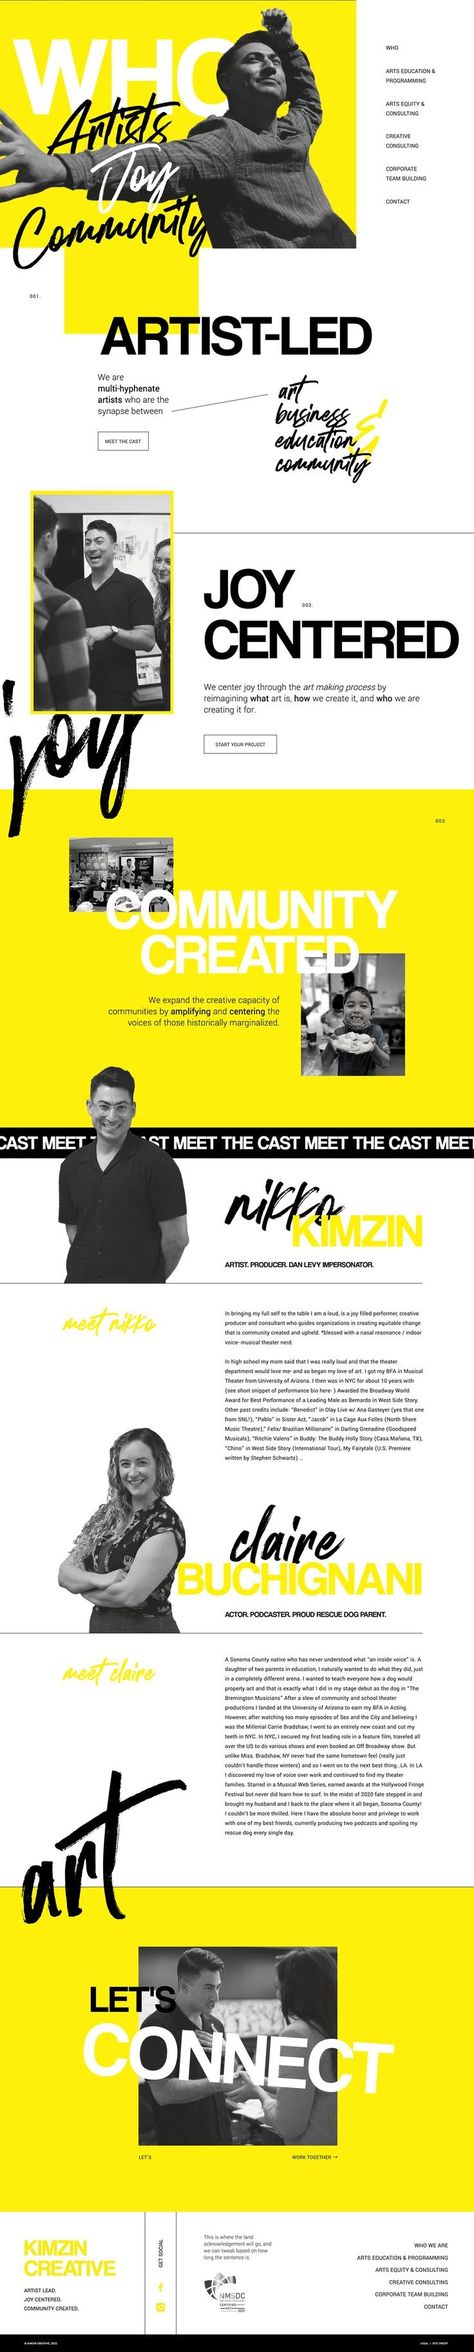 This bold website design is both edgy and minimalist, using a yellow white and black website color palette and black-and-white website images to keep the focus on the website content. This Showit web design project was fun and creative. Like what you see? Head to the Kleist Creative web design portfolio to book your own Showit website design project! Edgy Website Design, Edgy Website, Bold Website Design, Bold Website, Colorful Website Design, Black Website, Web Design Portfolio, Showit Website Design, Colorful Website